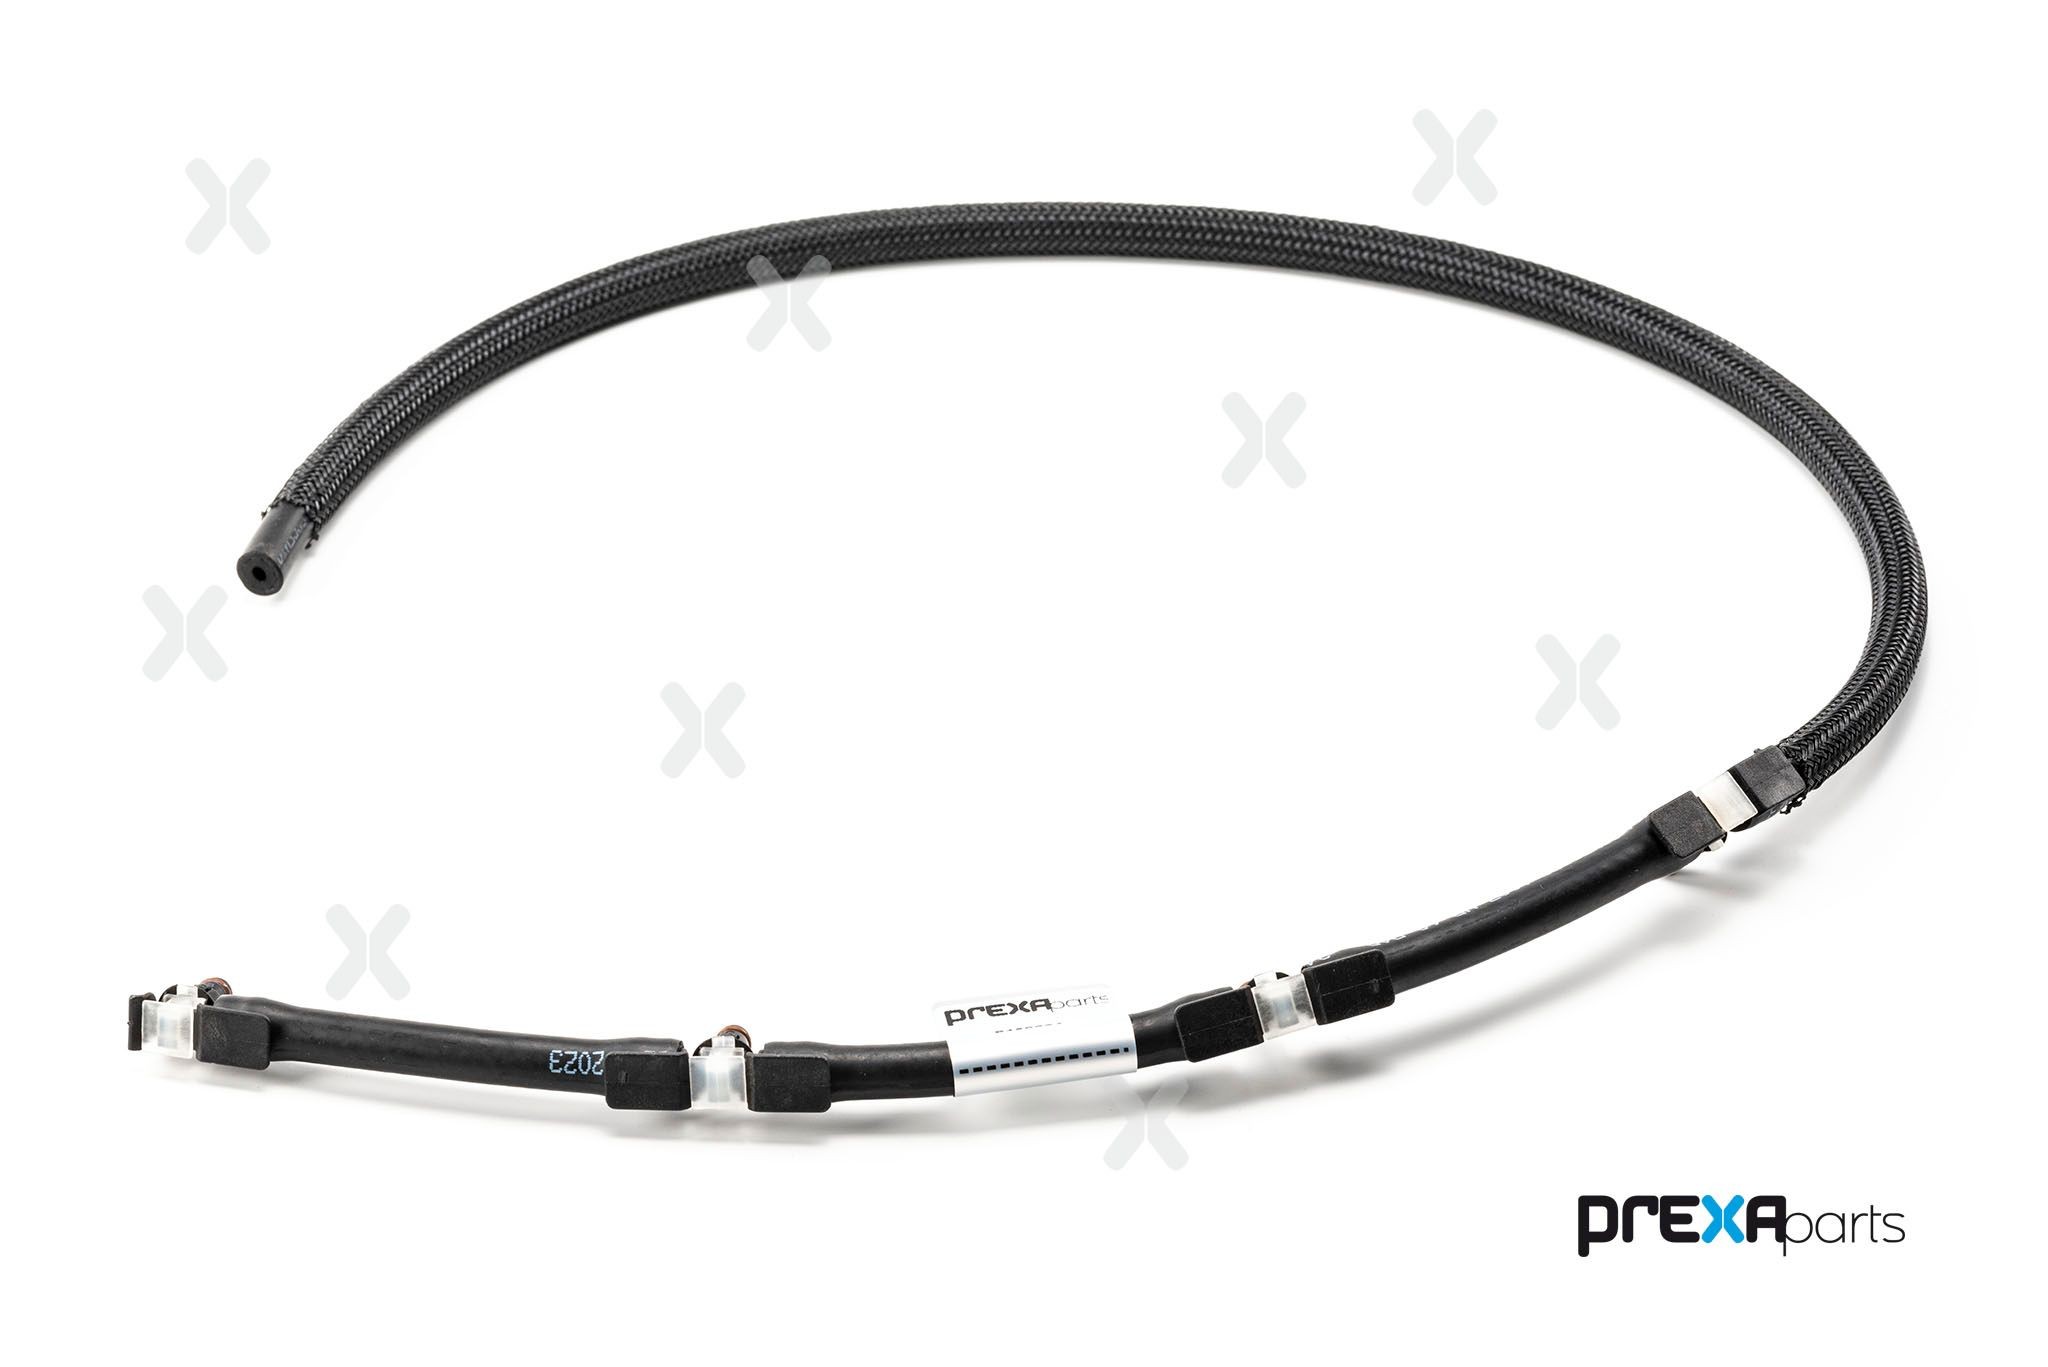 Original P150374 PREXAparts Hose, fuel overflow experience and price